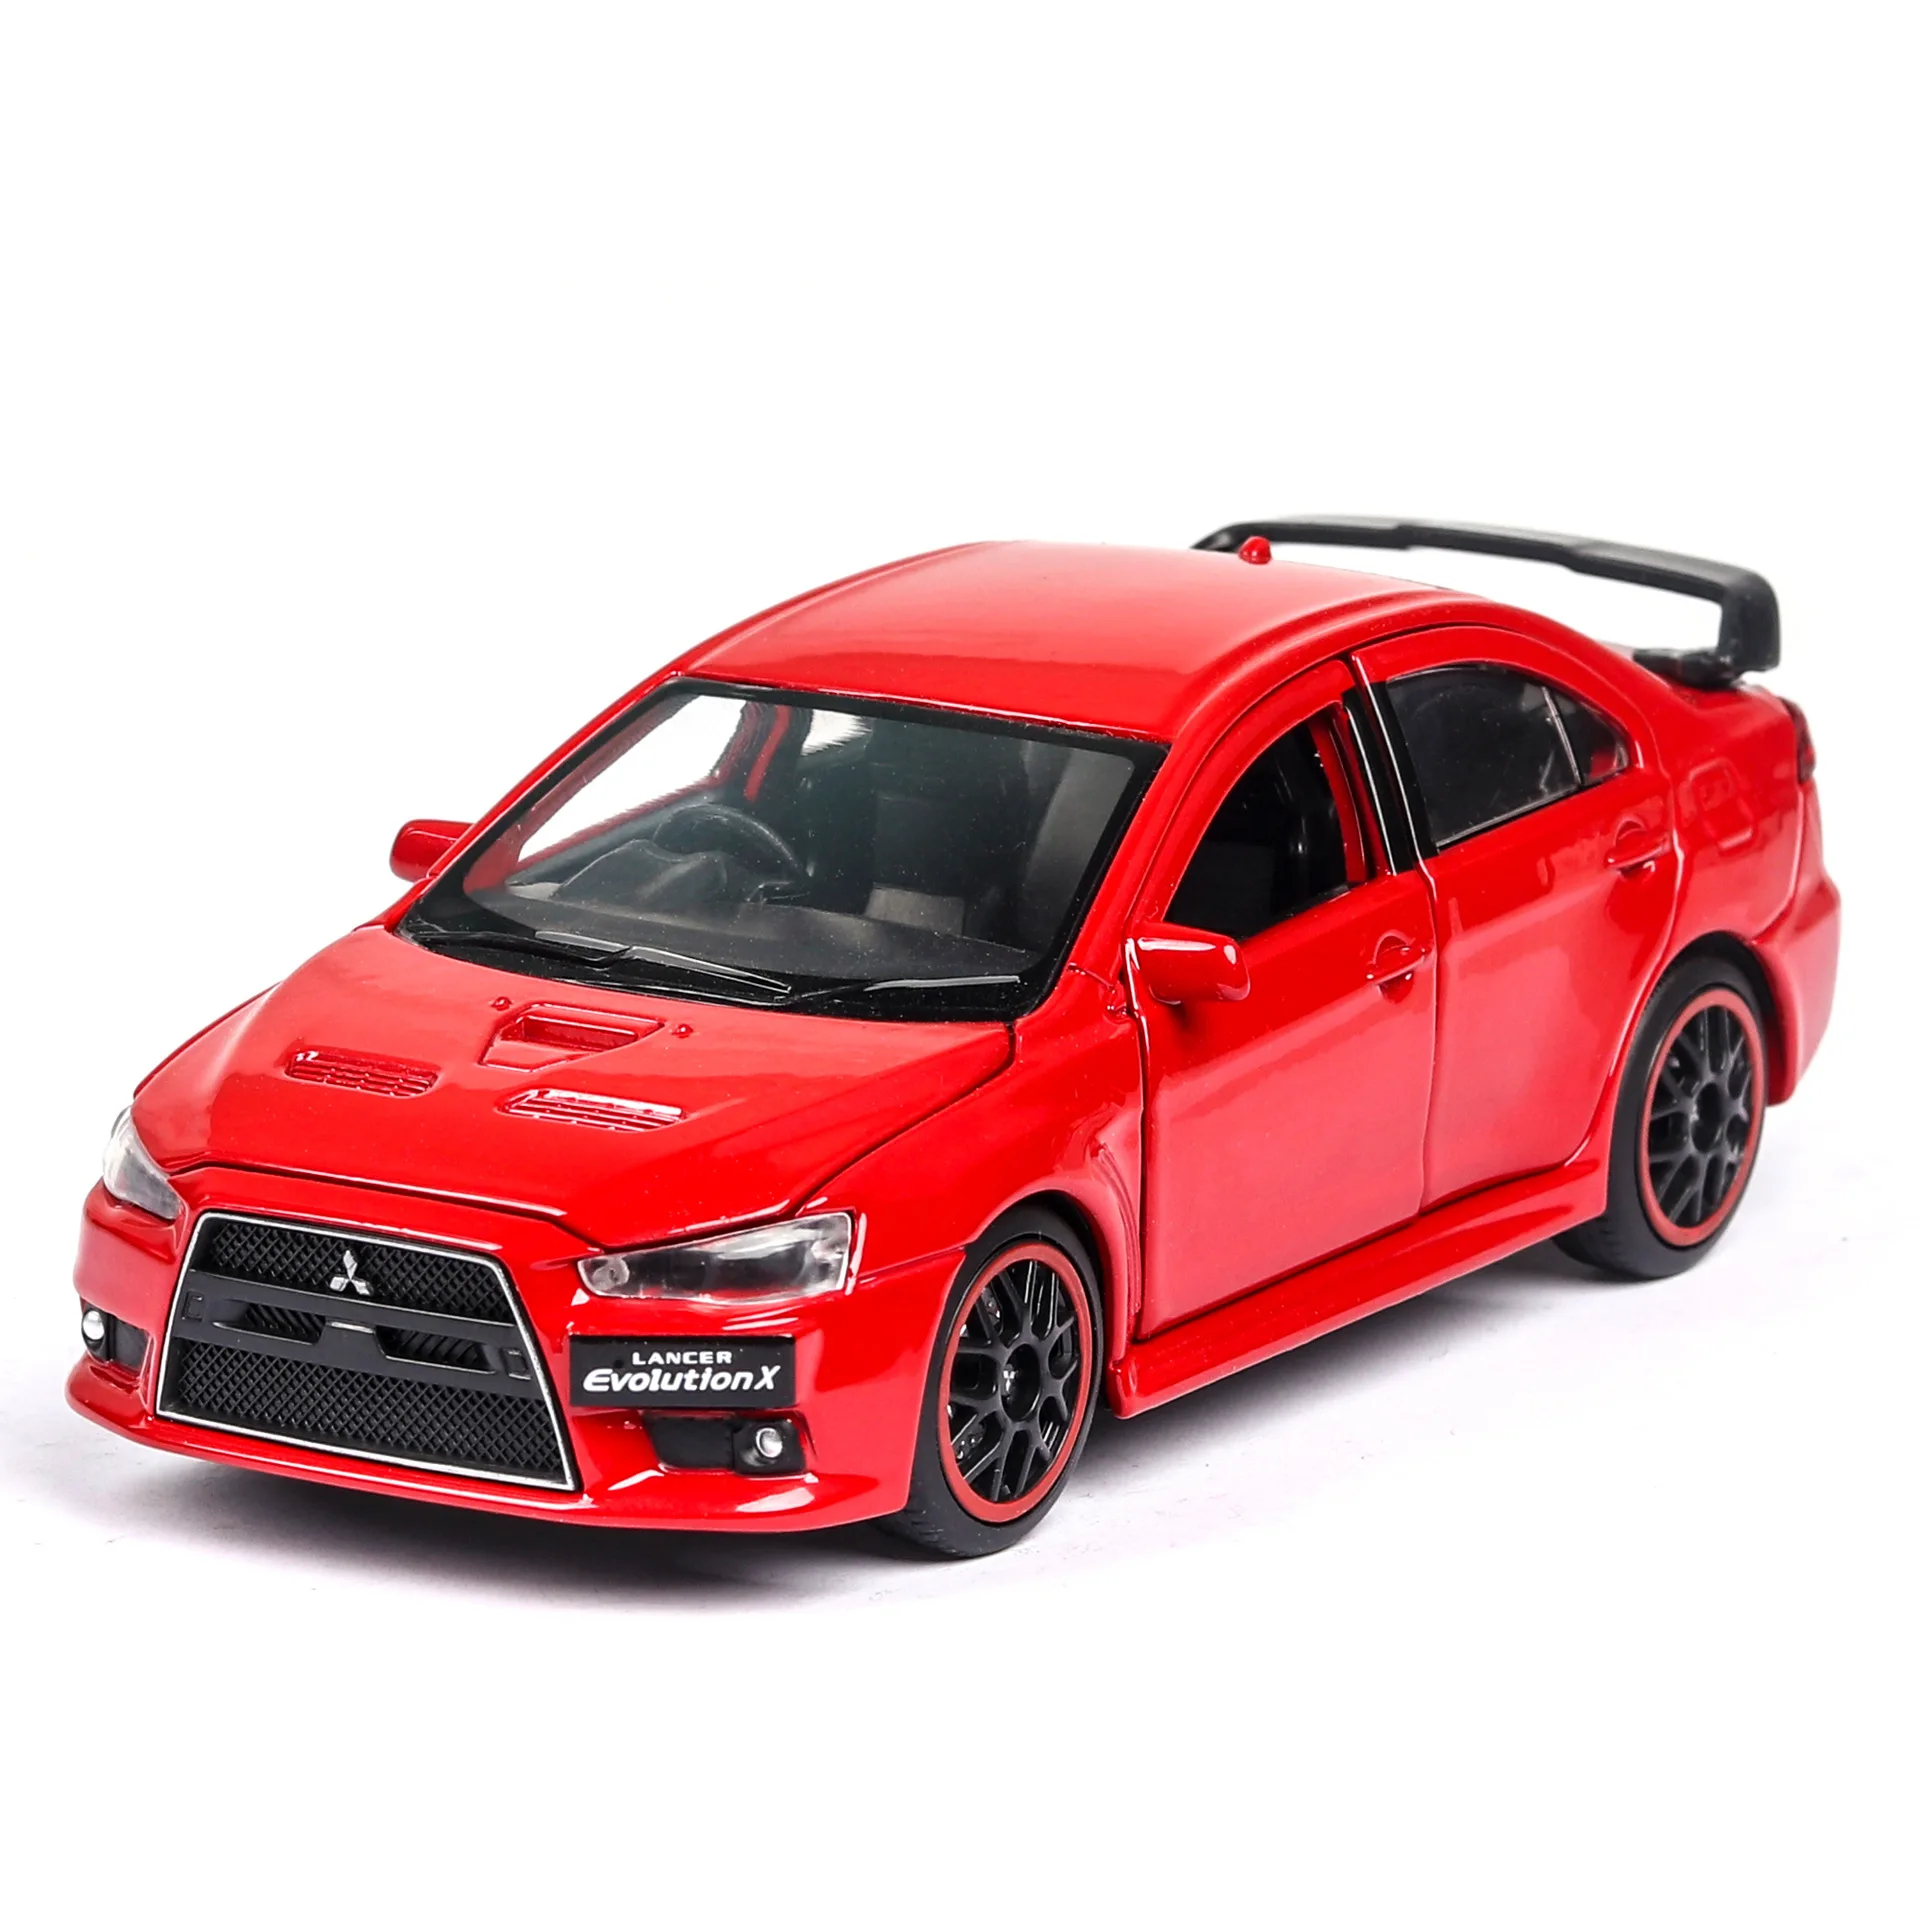 1:32 Diecast Toy Car Model Red Metal Sports Car Pull Back Car Open Door With Sound And Light Flash Collection Decoration Gift 1 14 simulation men s motorcycle racing alloy car model sound and light pull back children s toy car boy decoration gift